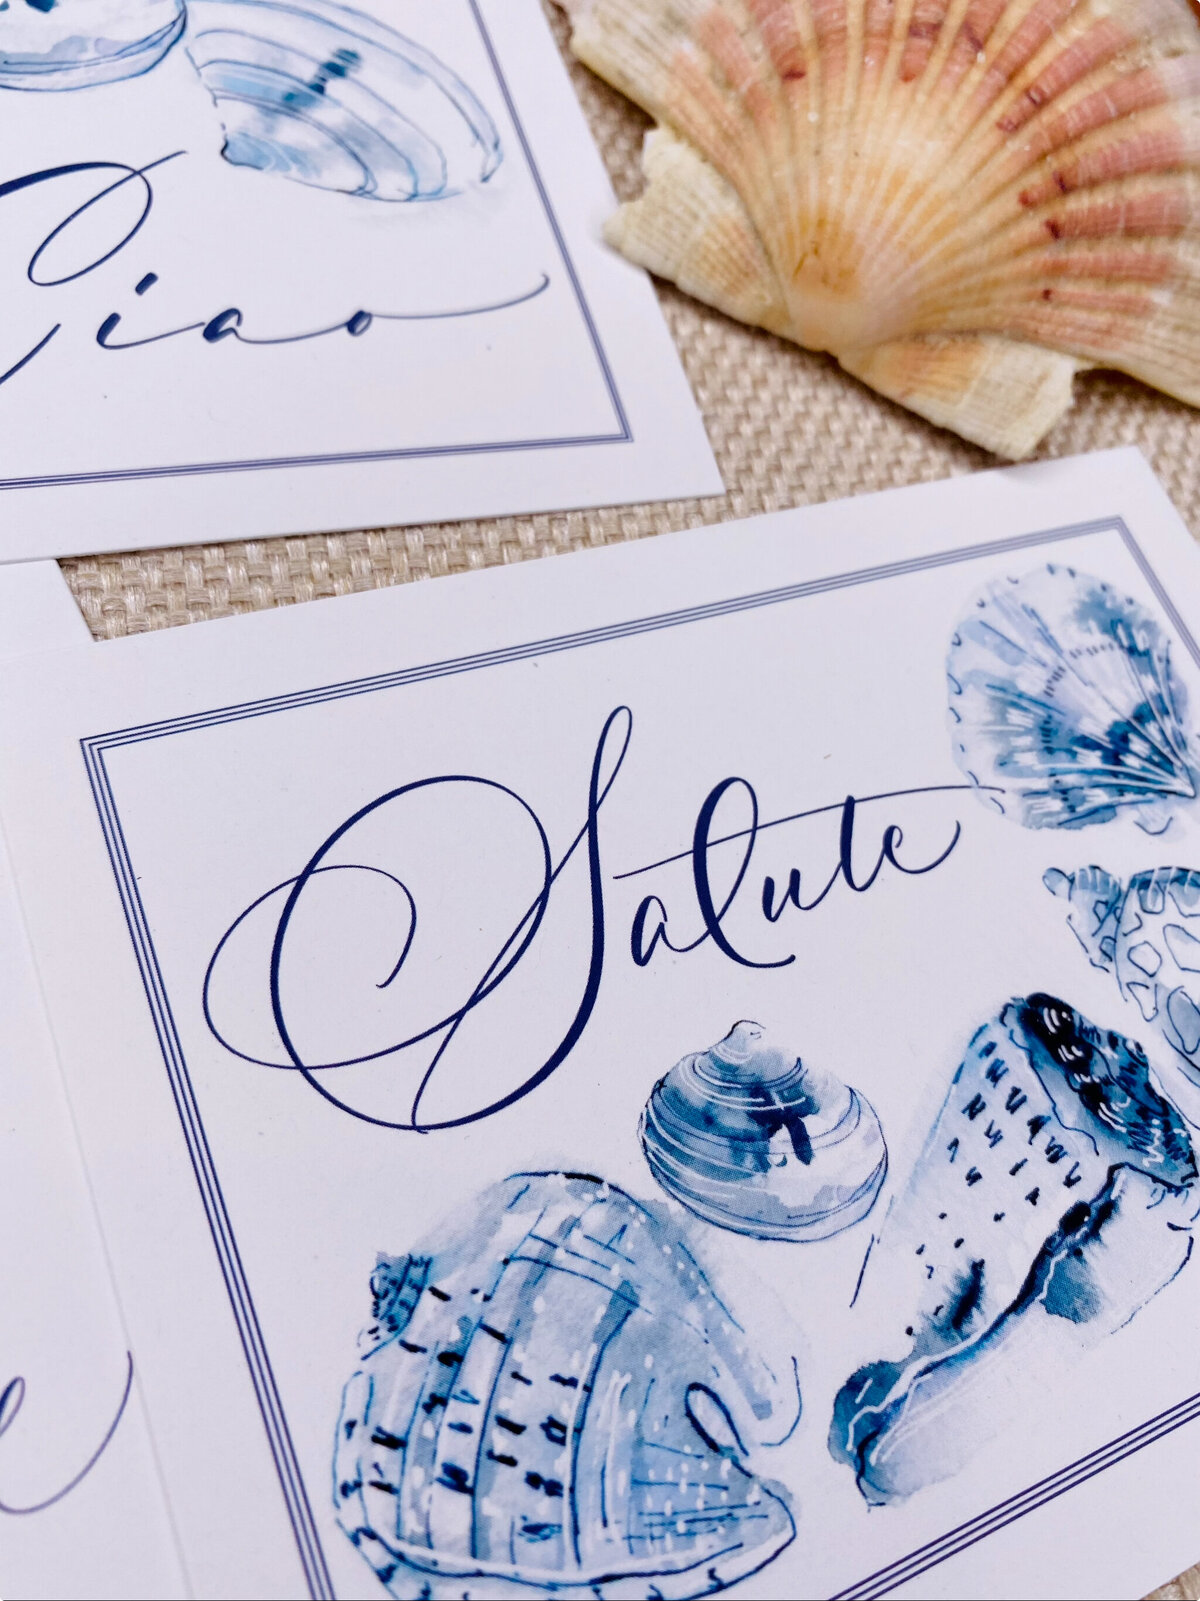 Custom envelope calligraphy with seashell watercolor